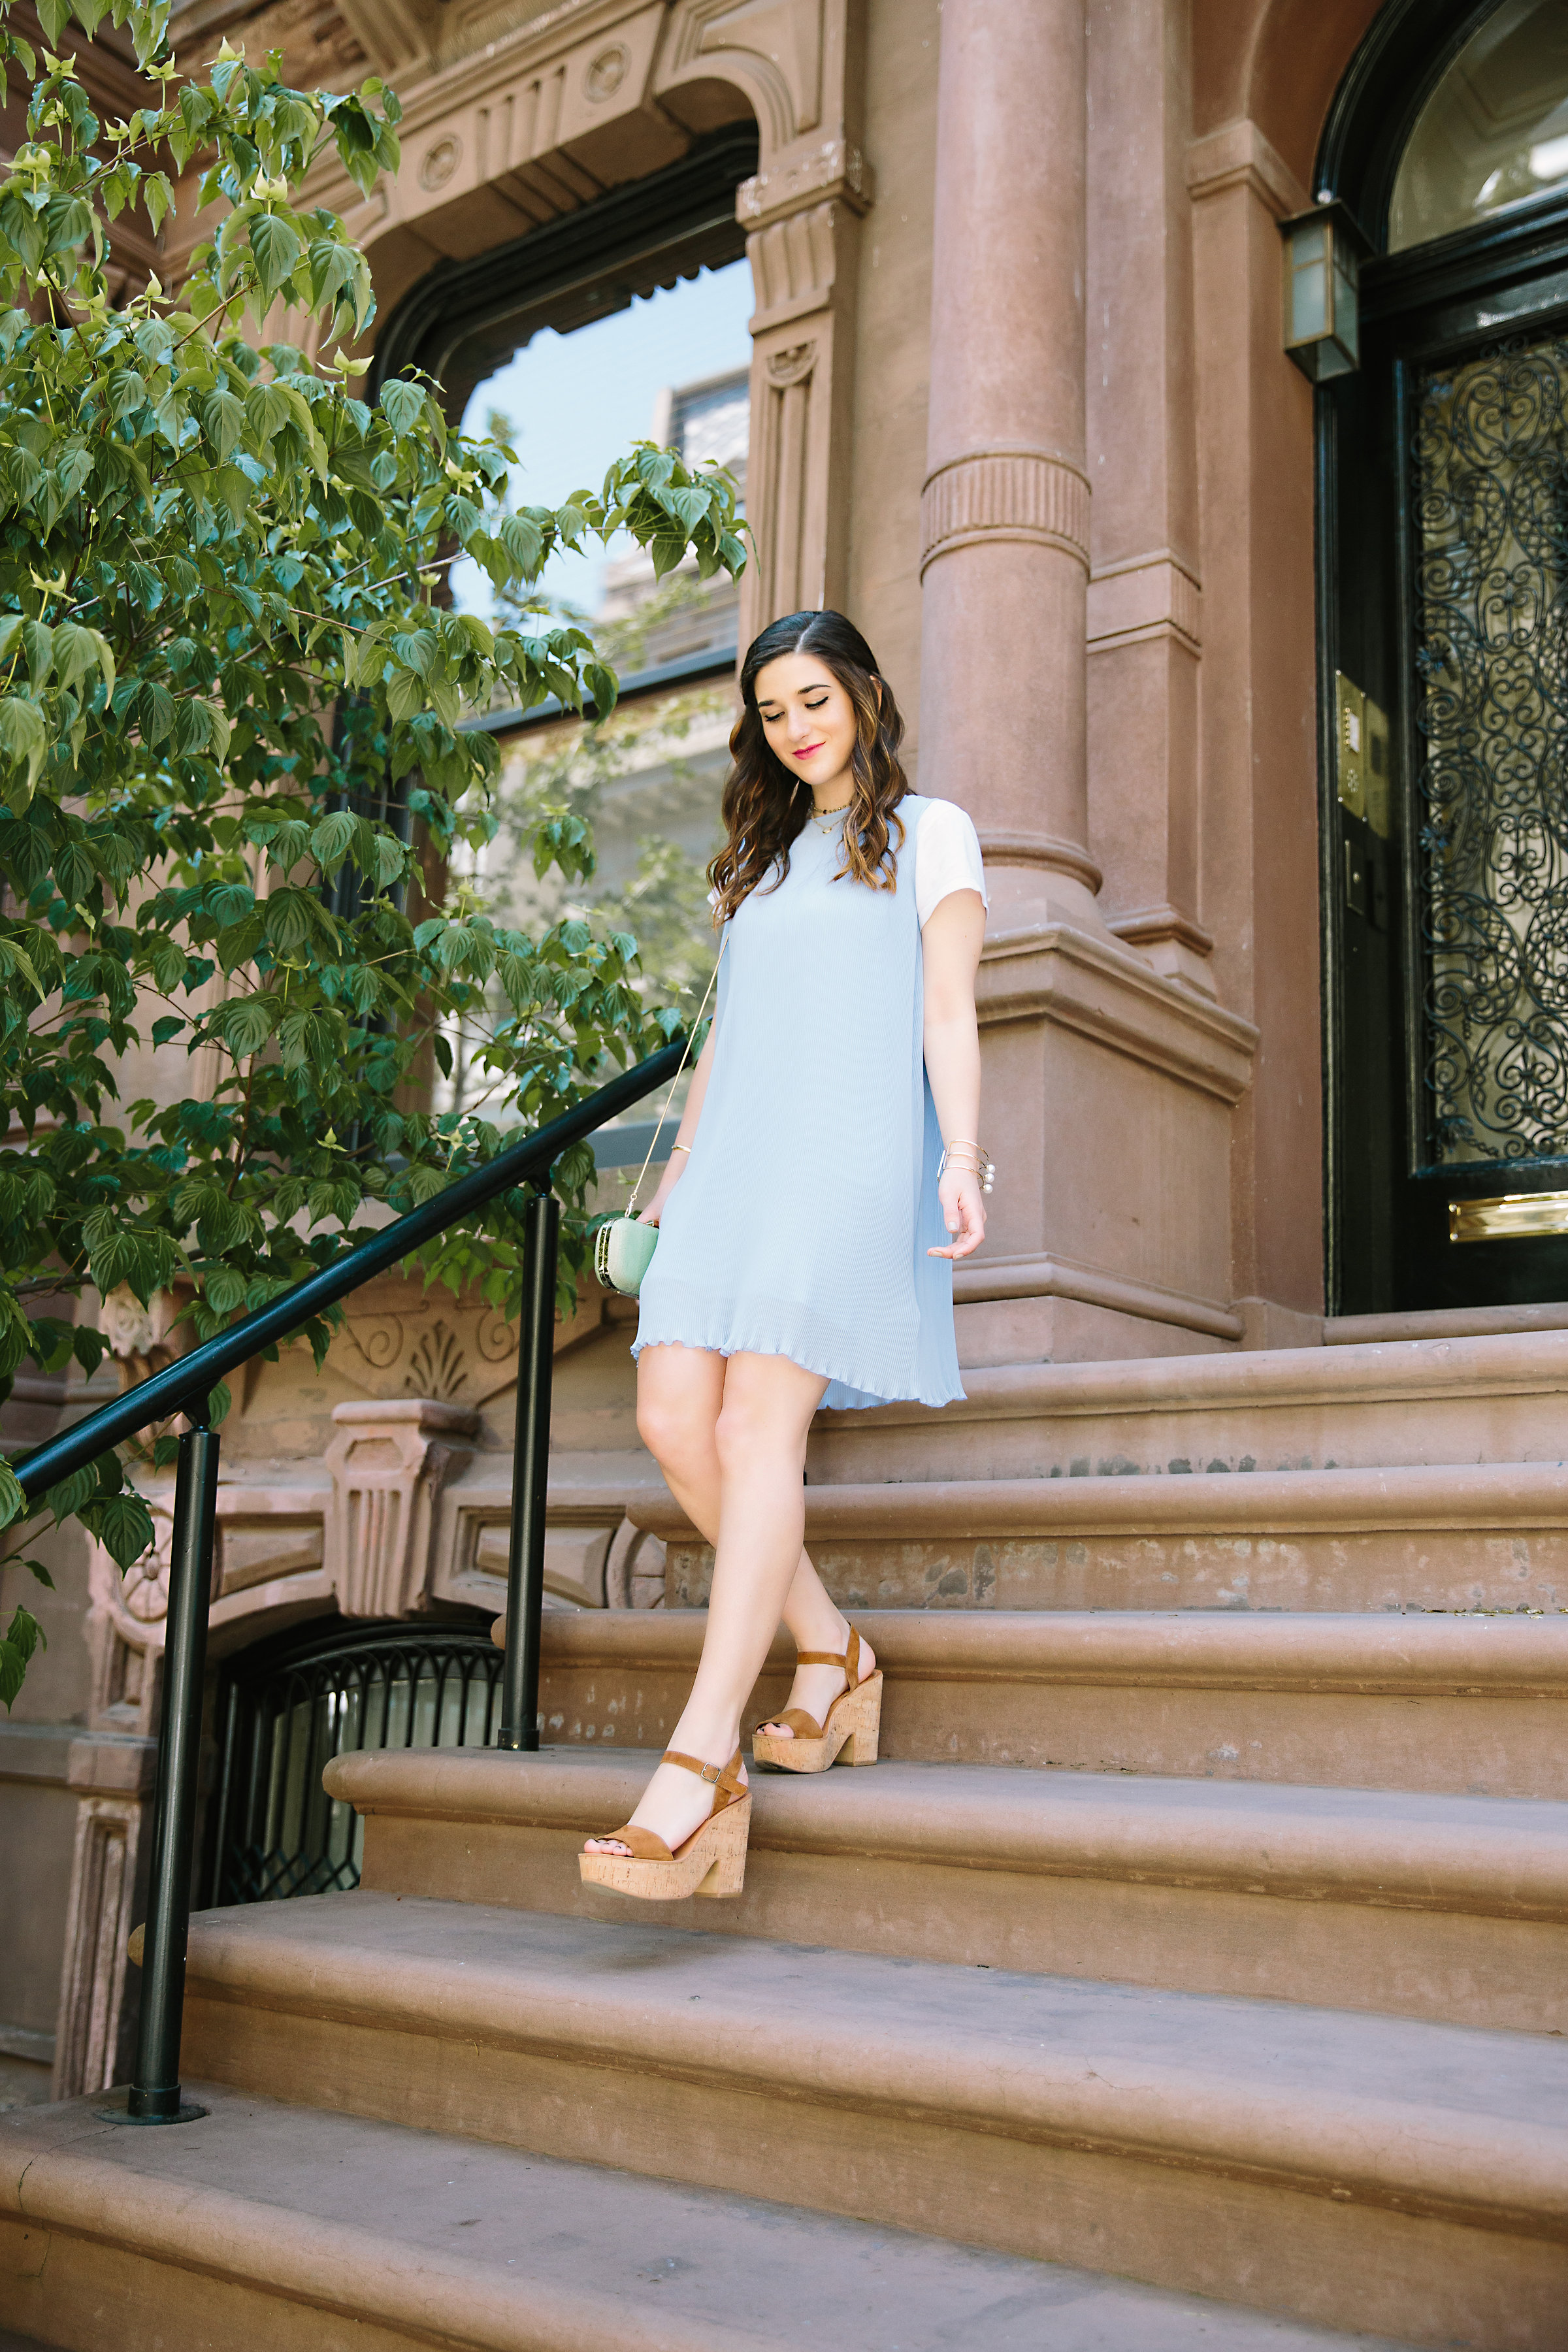 Pastel Blue Pleated Dress Keepsake The Label Louboutins & Love Fashion Blog Esther Santer NYC Street Style Blogger Outfit OOTD Pretty Photoshoot Upper East Side Dolce Vita Wedges Gold Jewelry Club Monaco Clutch White Tee Shirt Inspo Women Summer Look.jpg